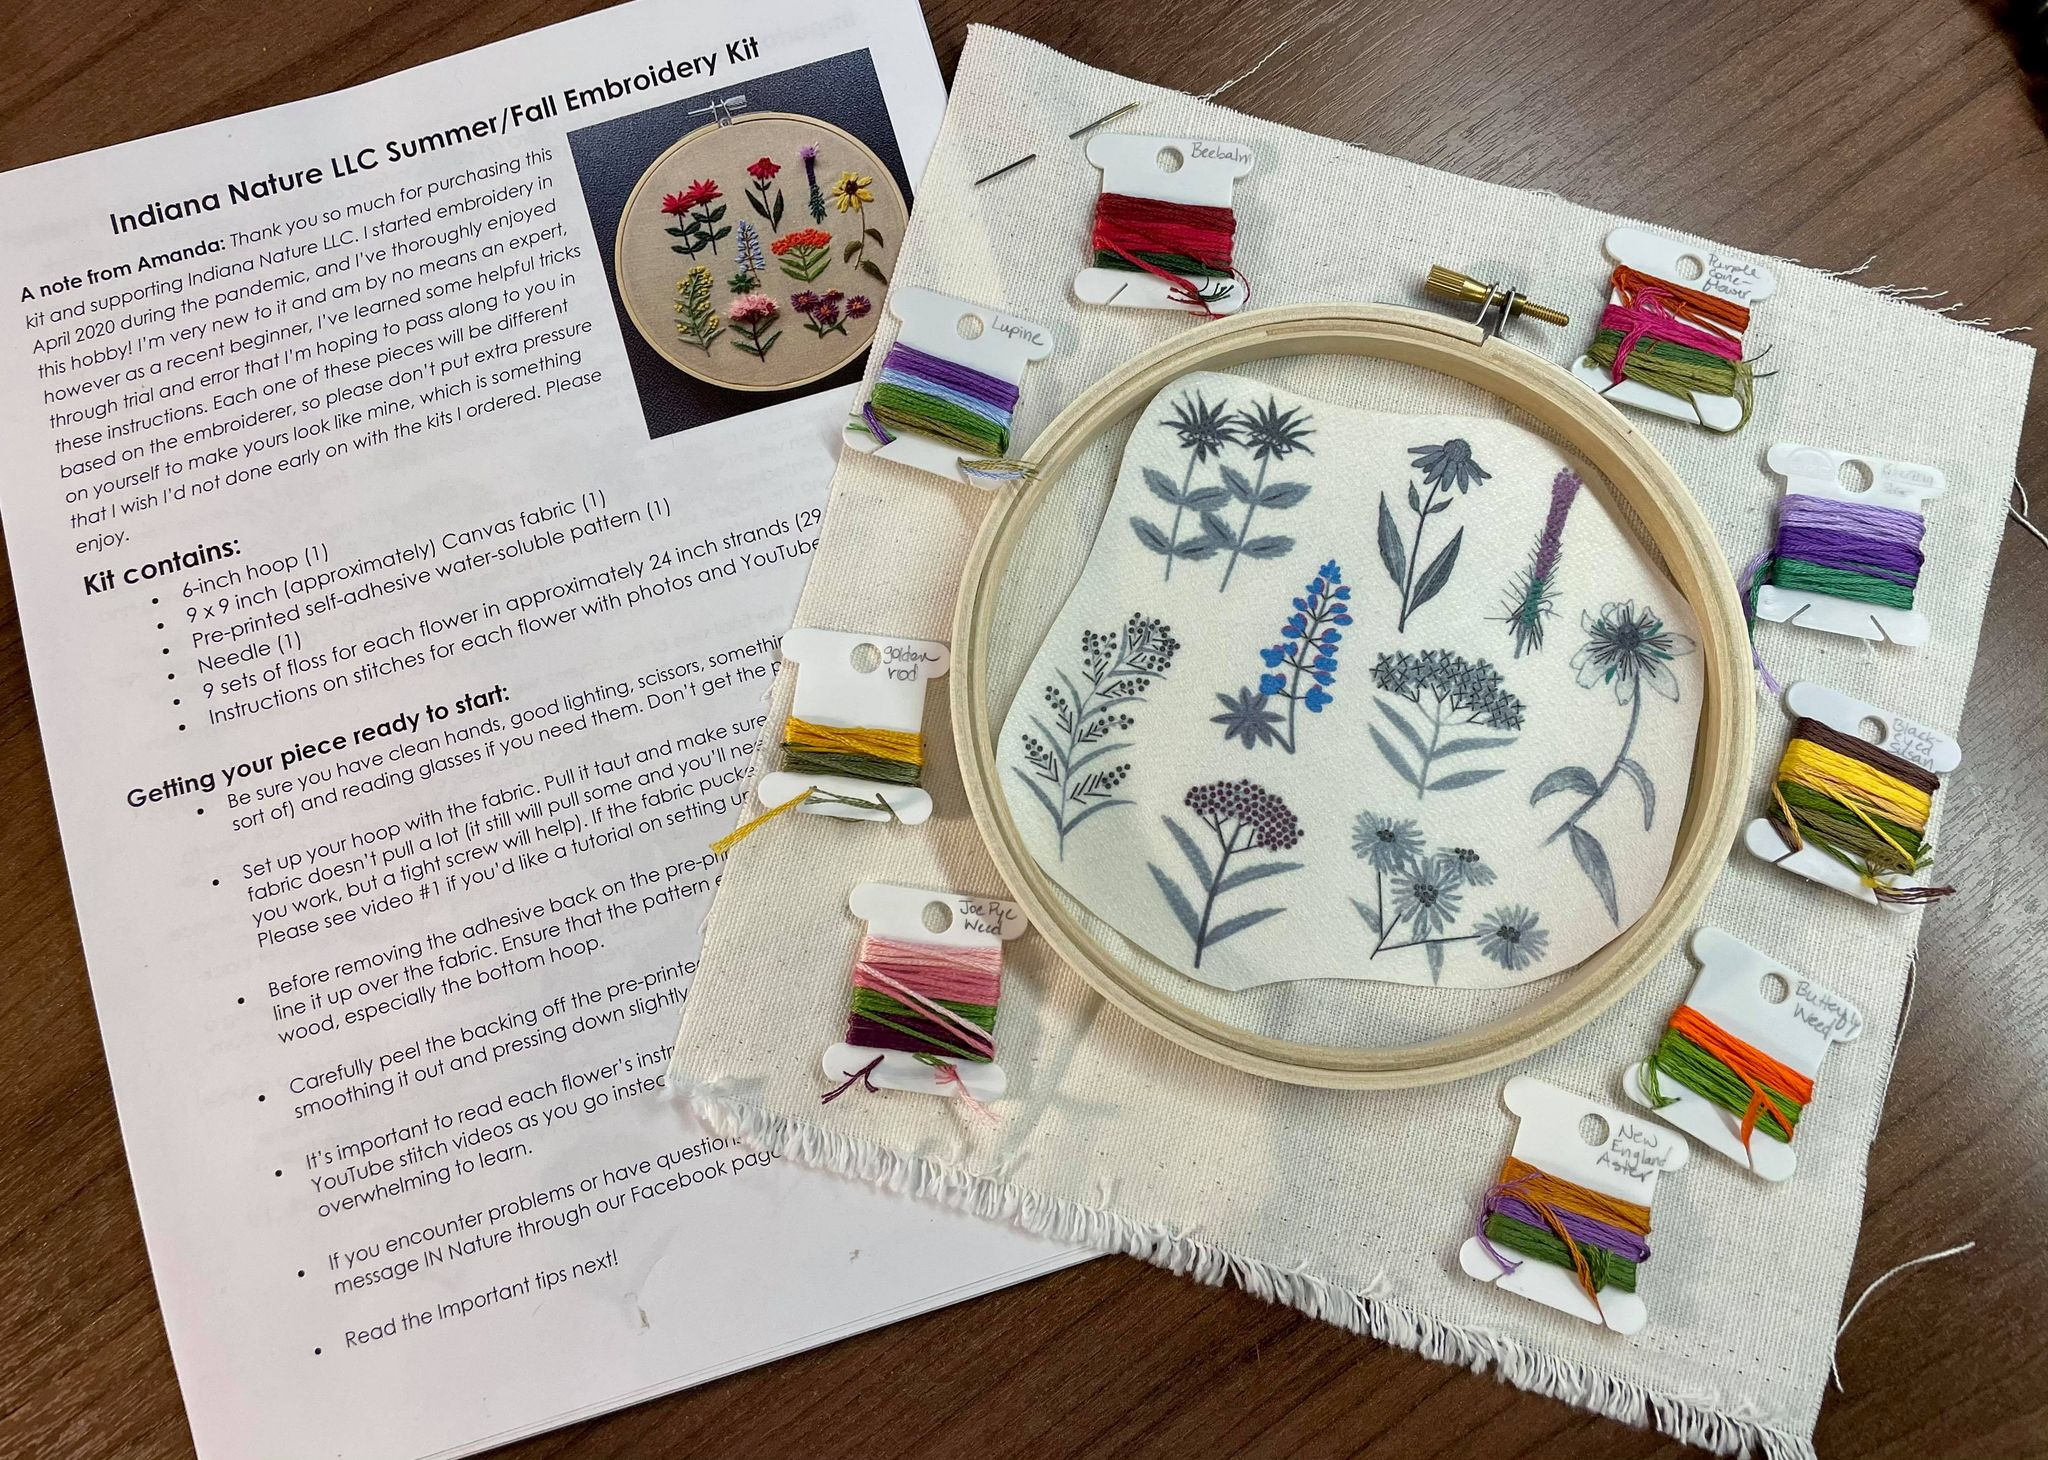 Embroidery Kit Image